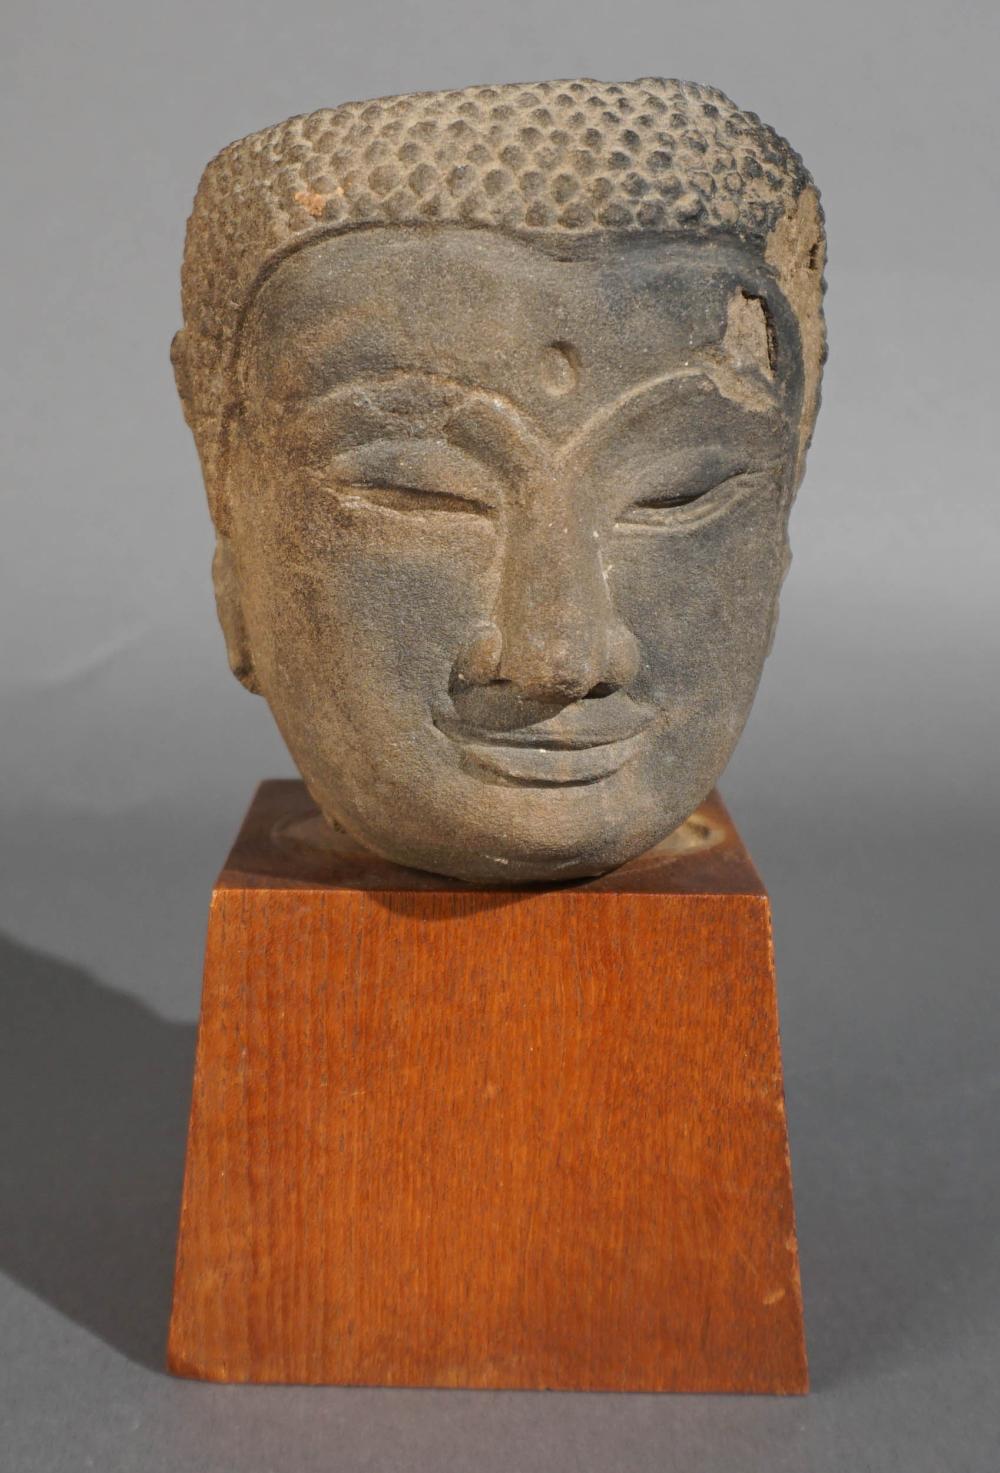 SOUTHEAST ASIAN CARVED STONE BUST 2e716f